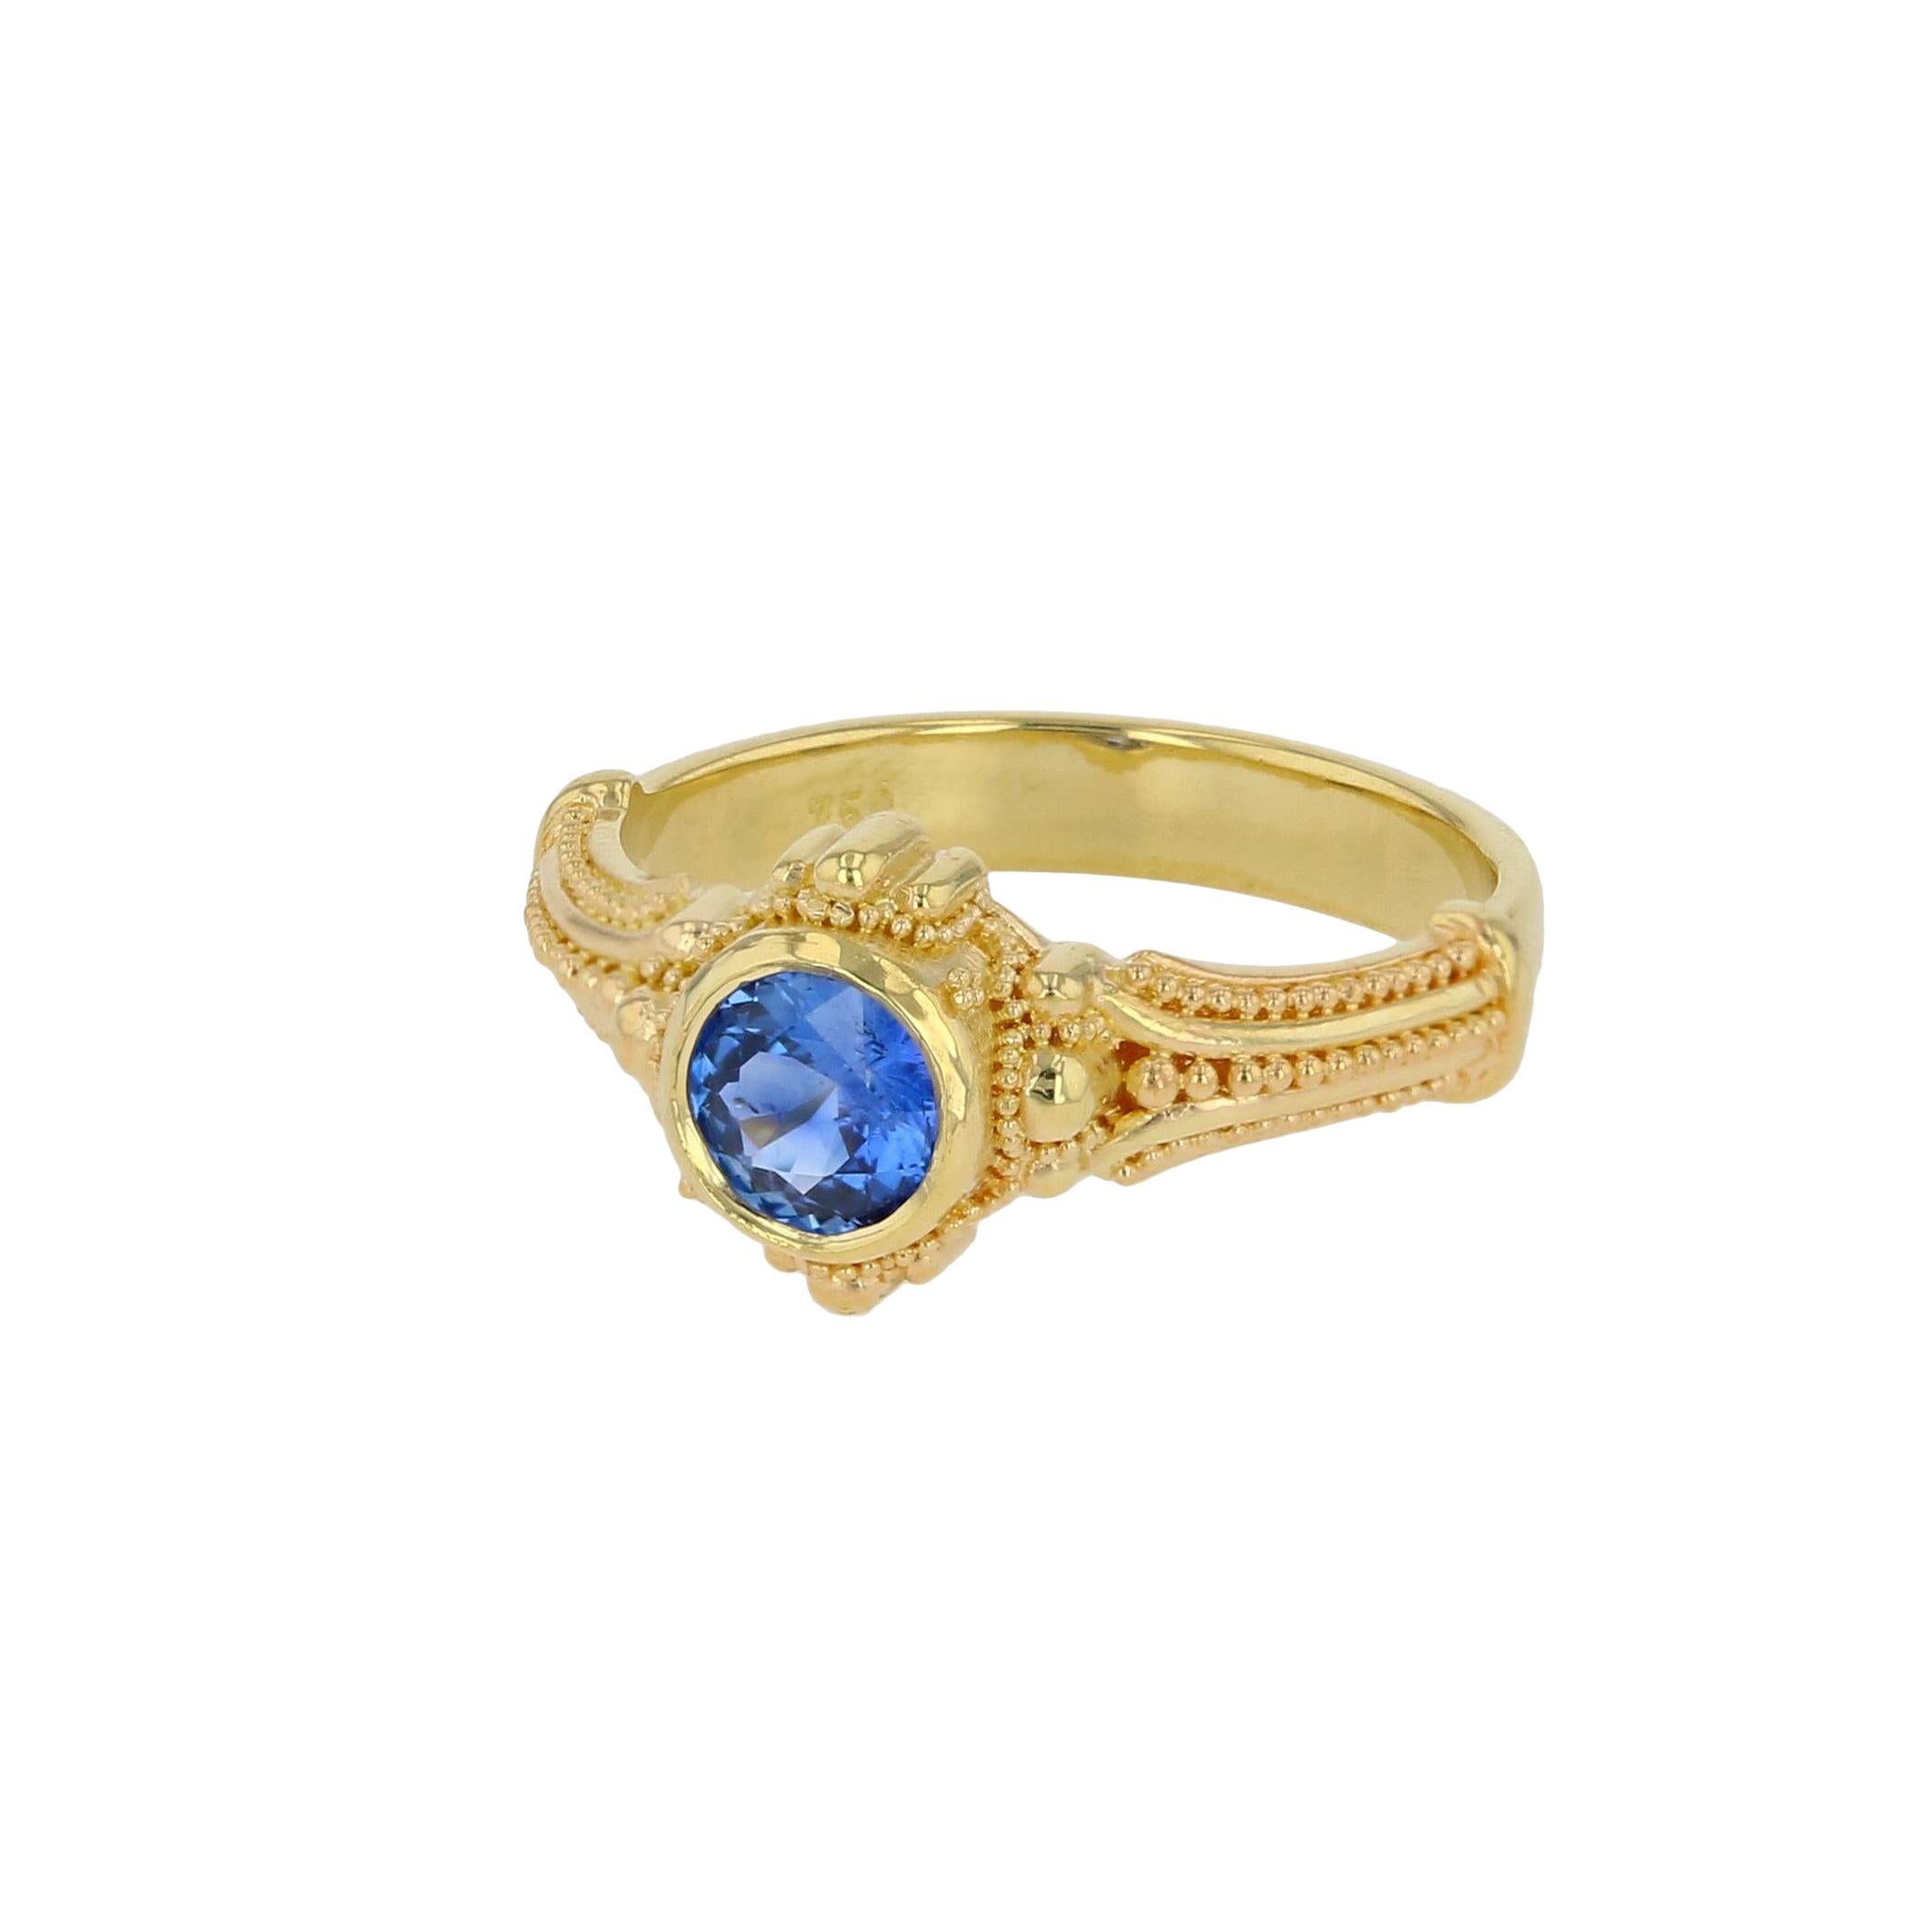 Kent Raible 18 Karat Gold Solitare Ring with Blue Sapphire and fine Granulation In New Condition For Sale In Mossrock, WA